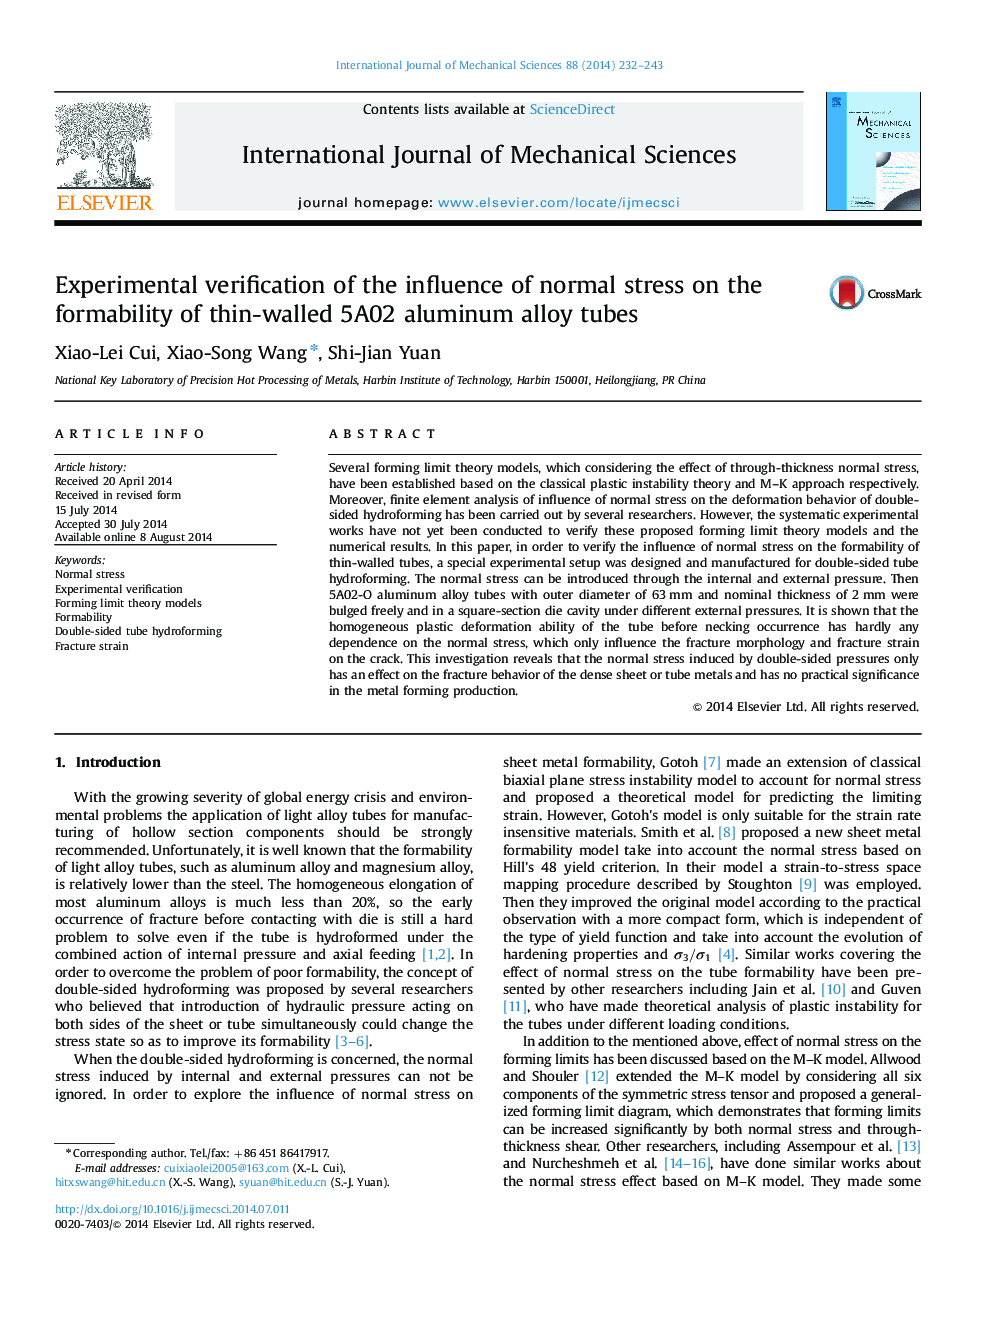 Experimental verification of the influence of normal stress on the formability of thin-walled 5A02 aluminum alloy tubes